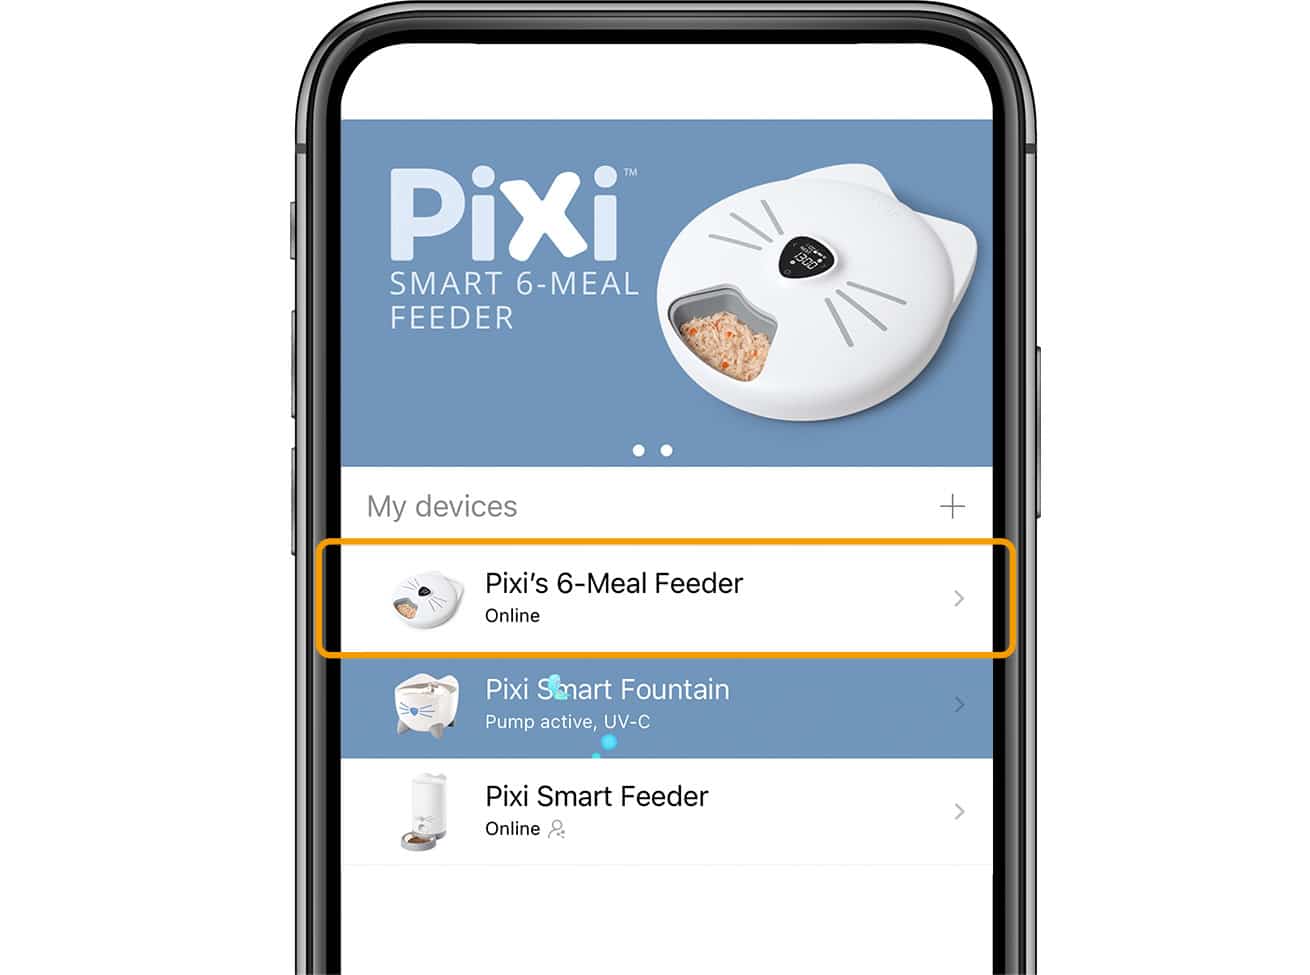 Overview of PIXI devices in PIXI app